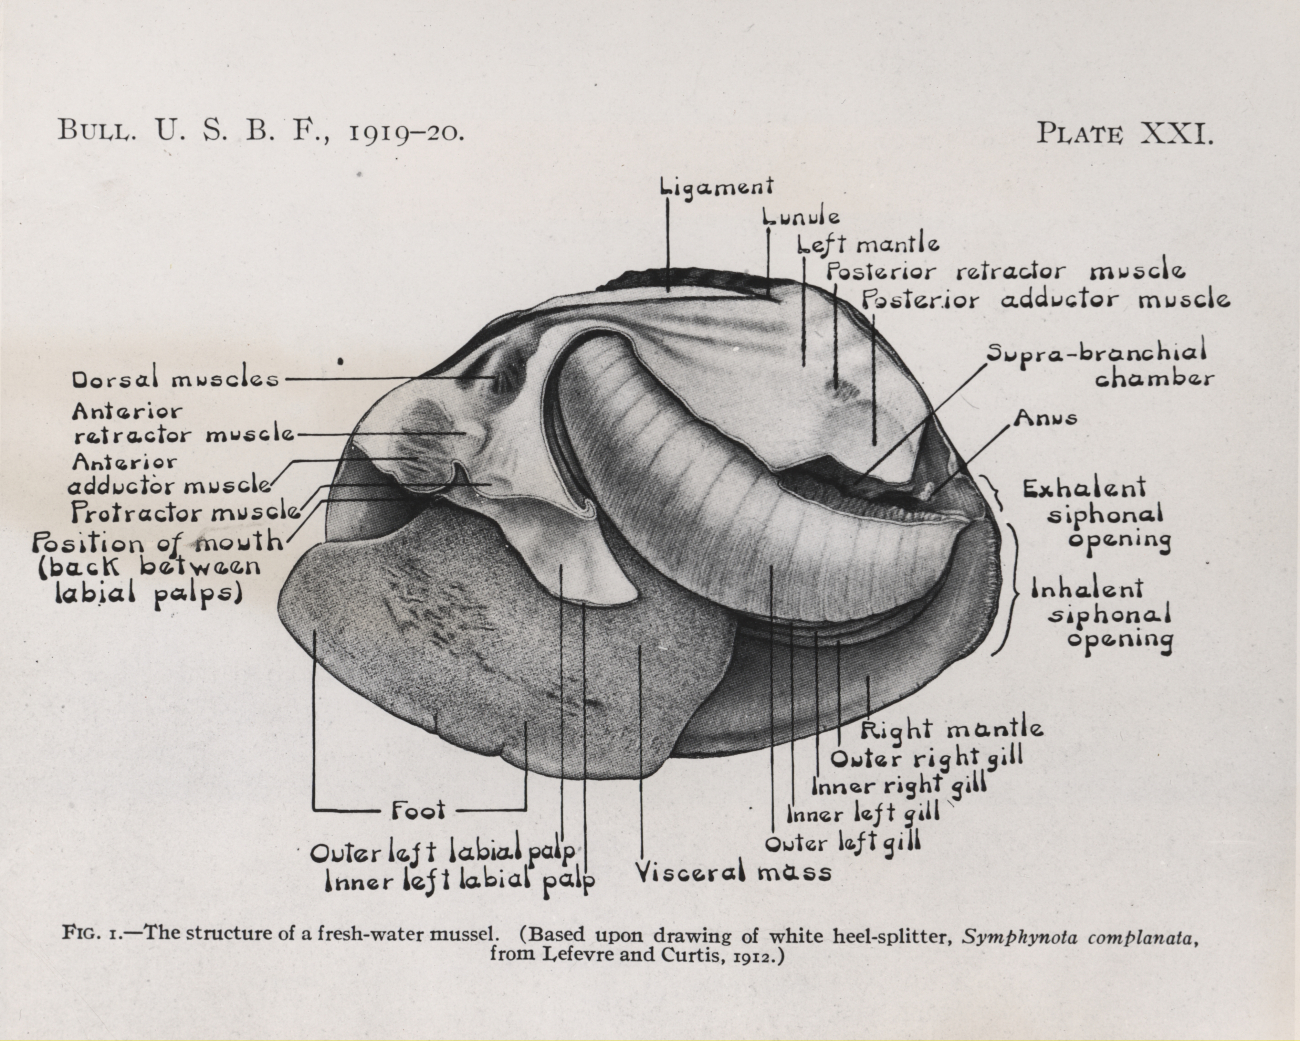 Structure of a fresh-water mussel drawn by George LeFevre and W